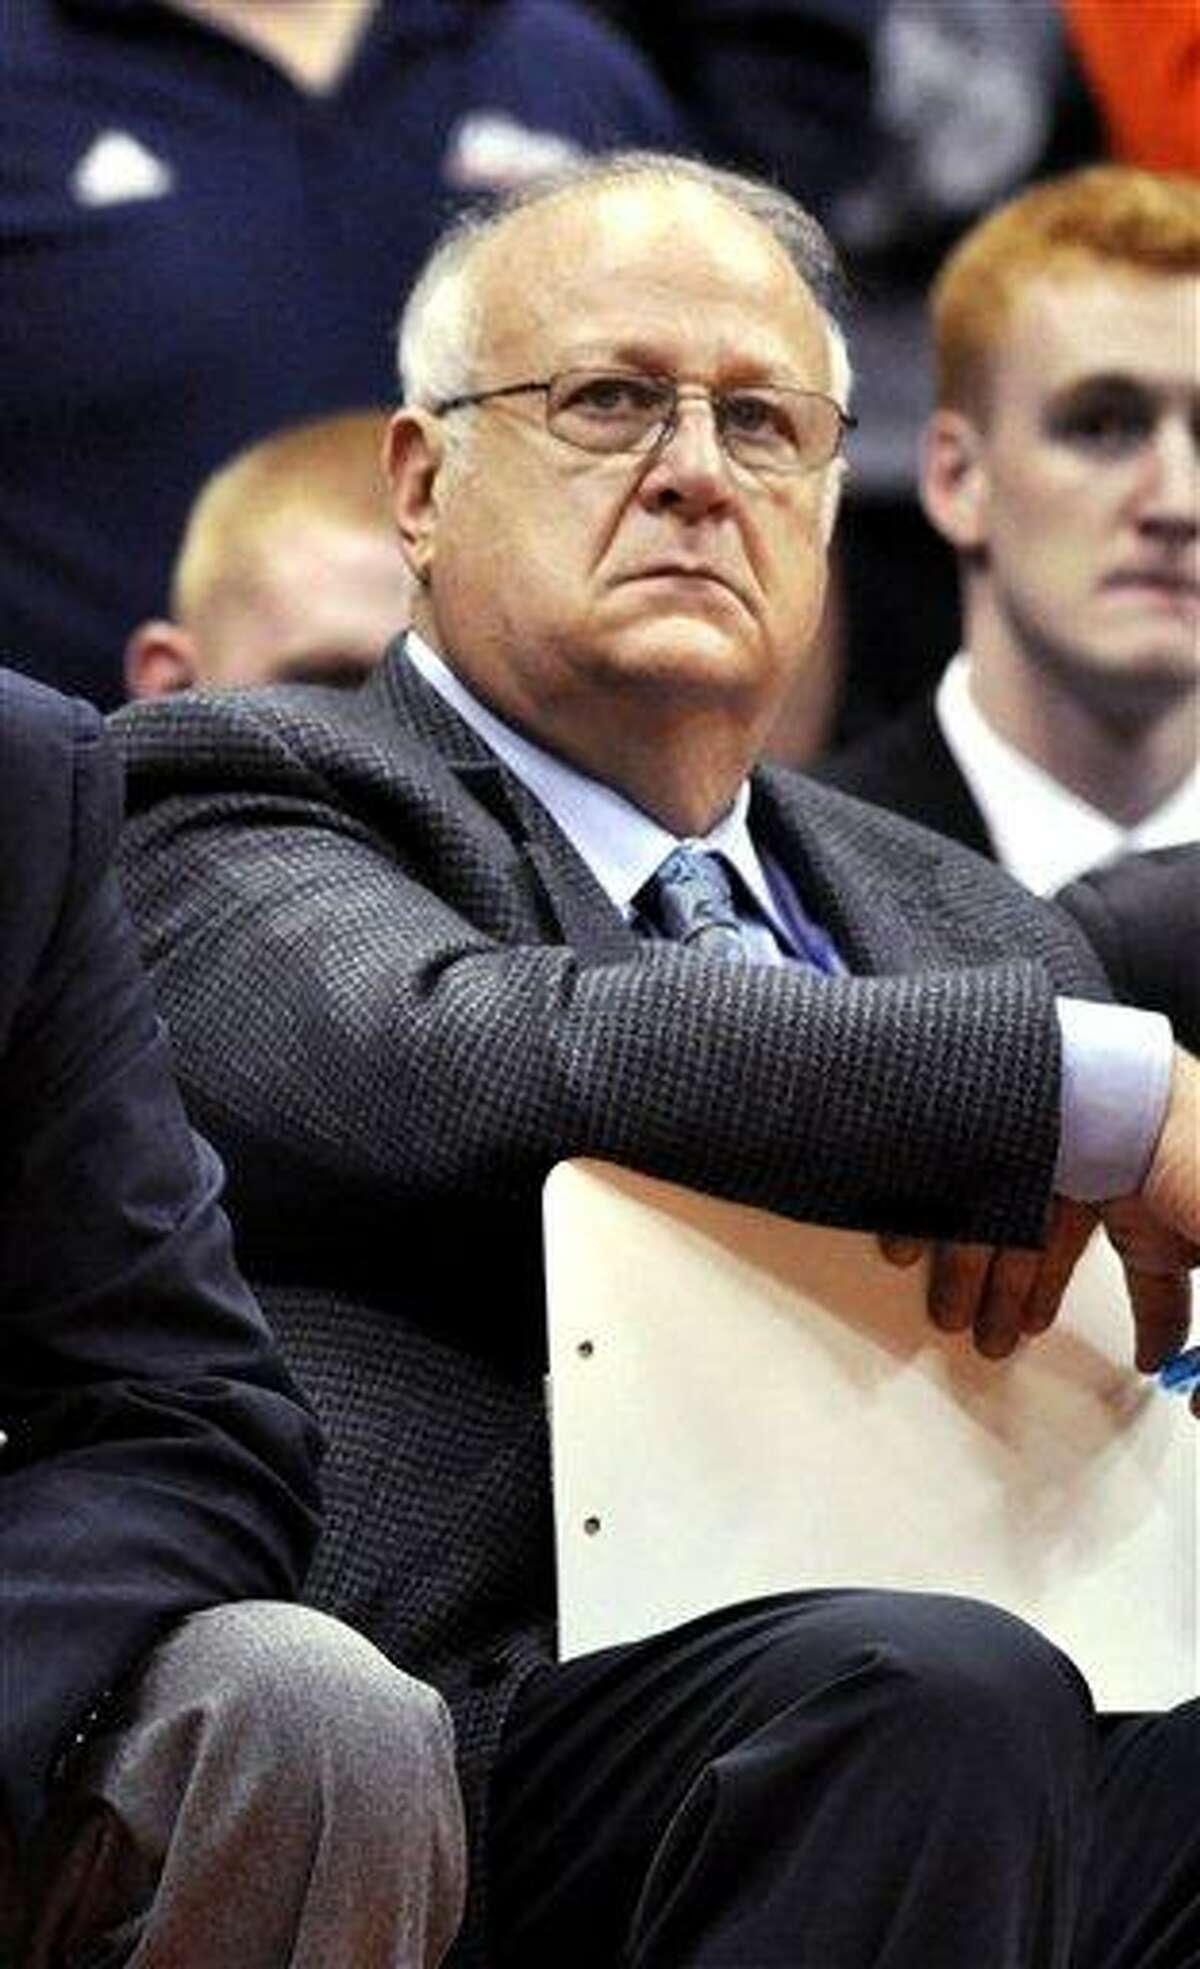 This file photo from Nov. 14 shows Syracuse basketball assistant coach Bernie Fine watching a college basketball game against Manhattan in the NIT Season Tip-Off in Syracuse, N.Y. Associated Press